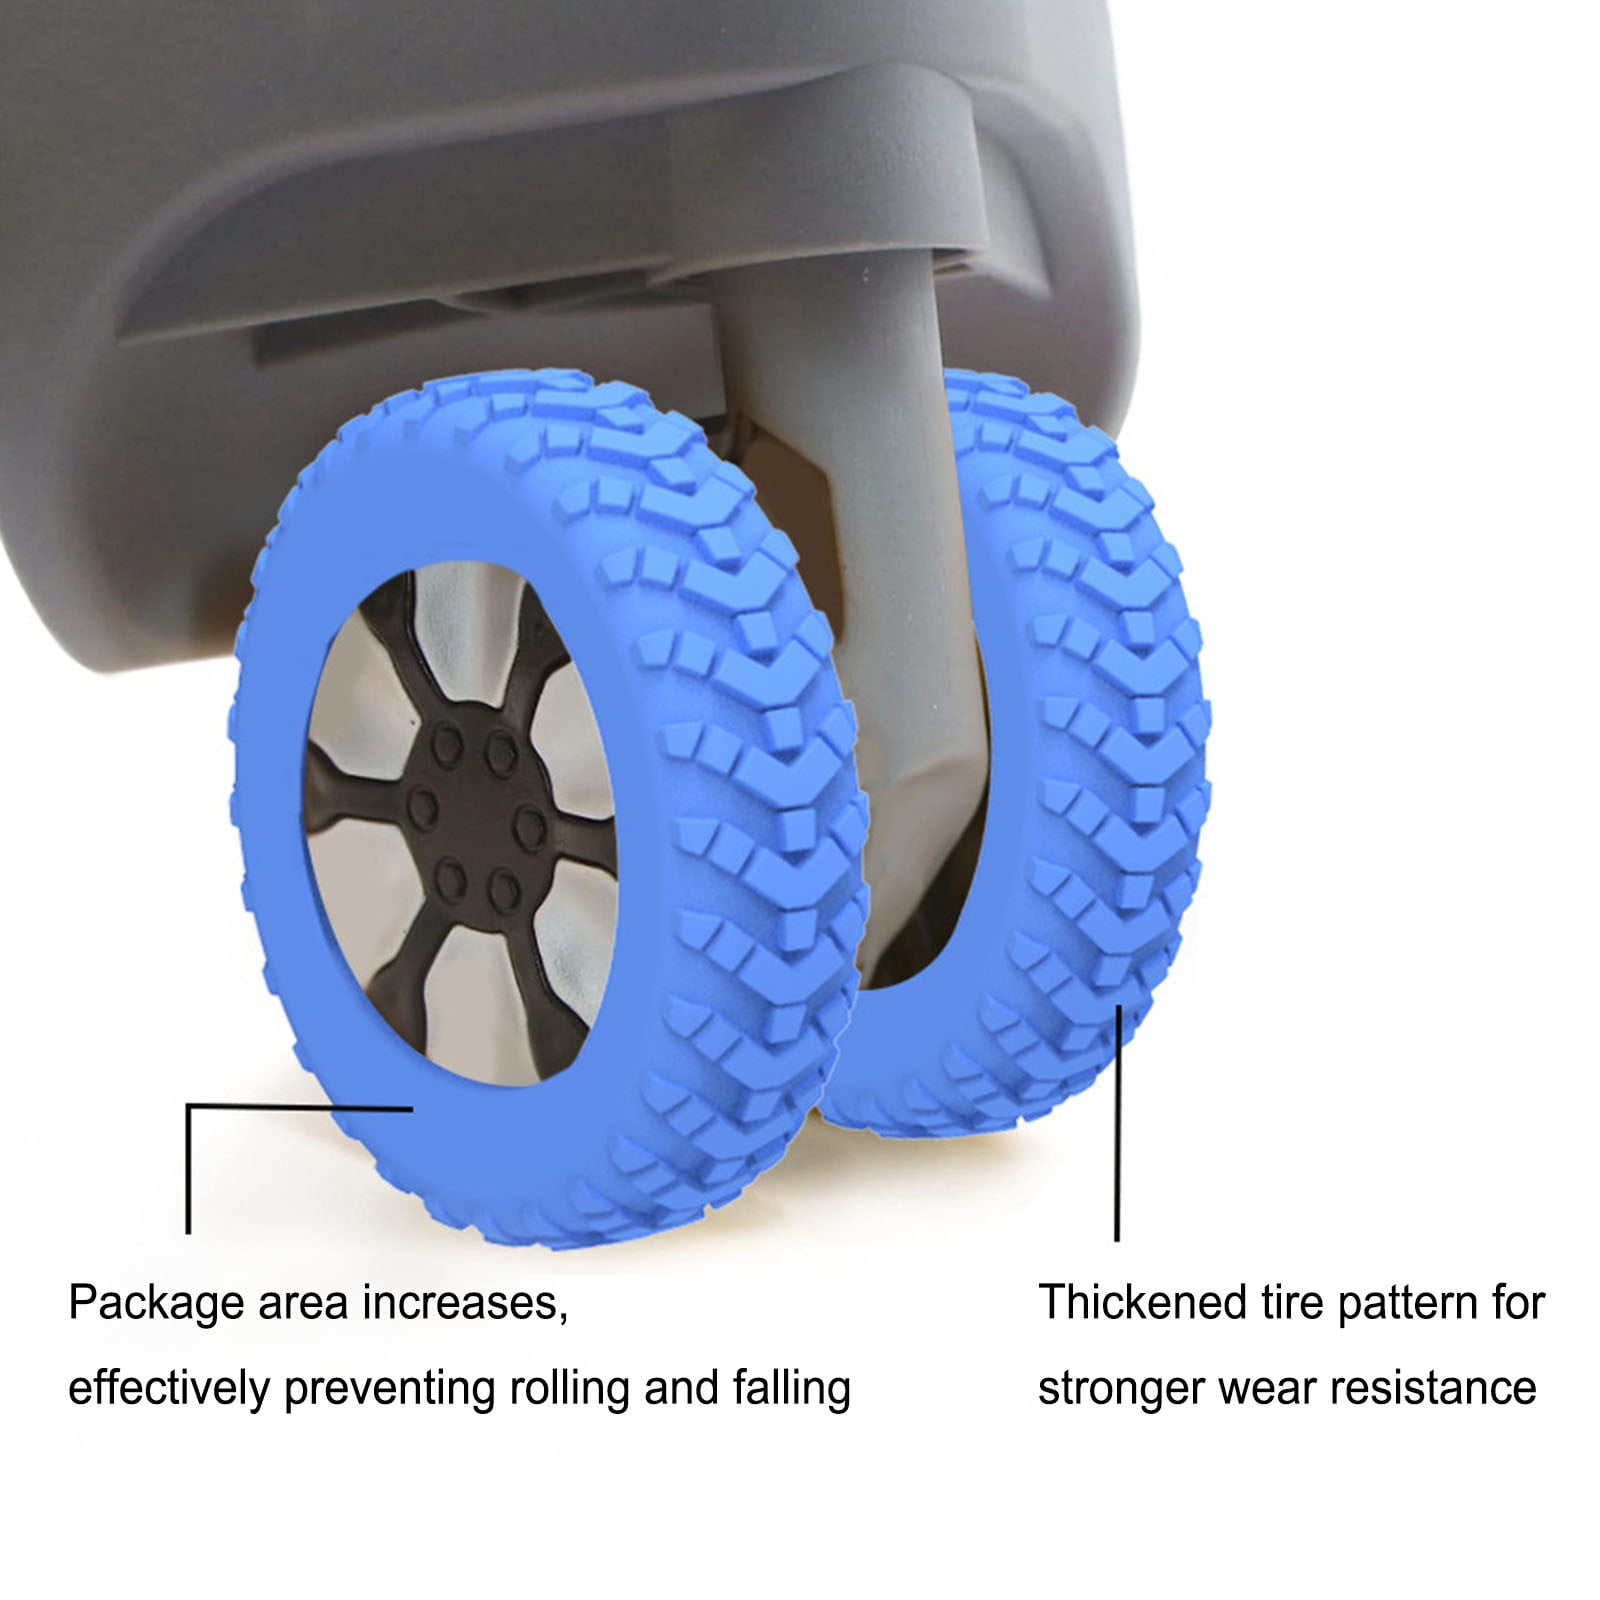 LEWSHQI 8Pack Suitcase Wheels Cover/Suitcase Wheel Covers - Carry on Luggage Wheels Protective Covers for Most 8-spinner Wheels Luggage/Luggage